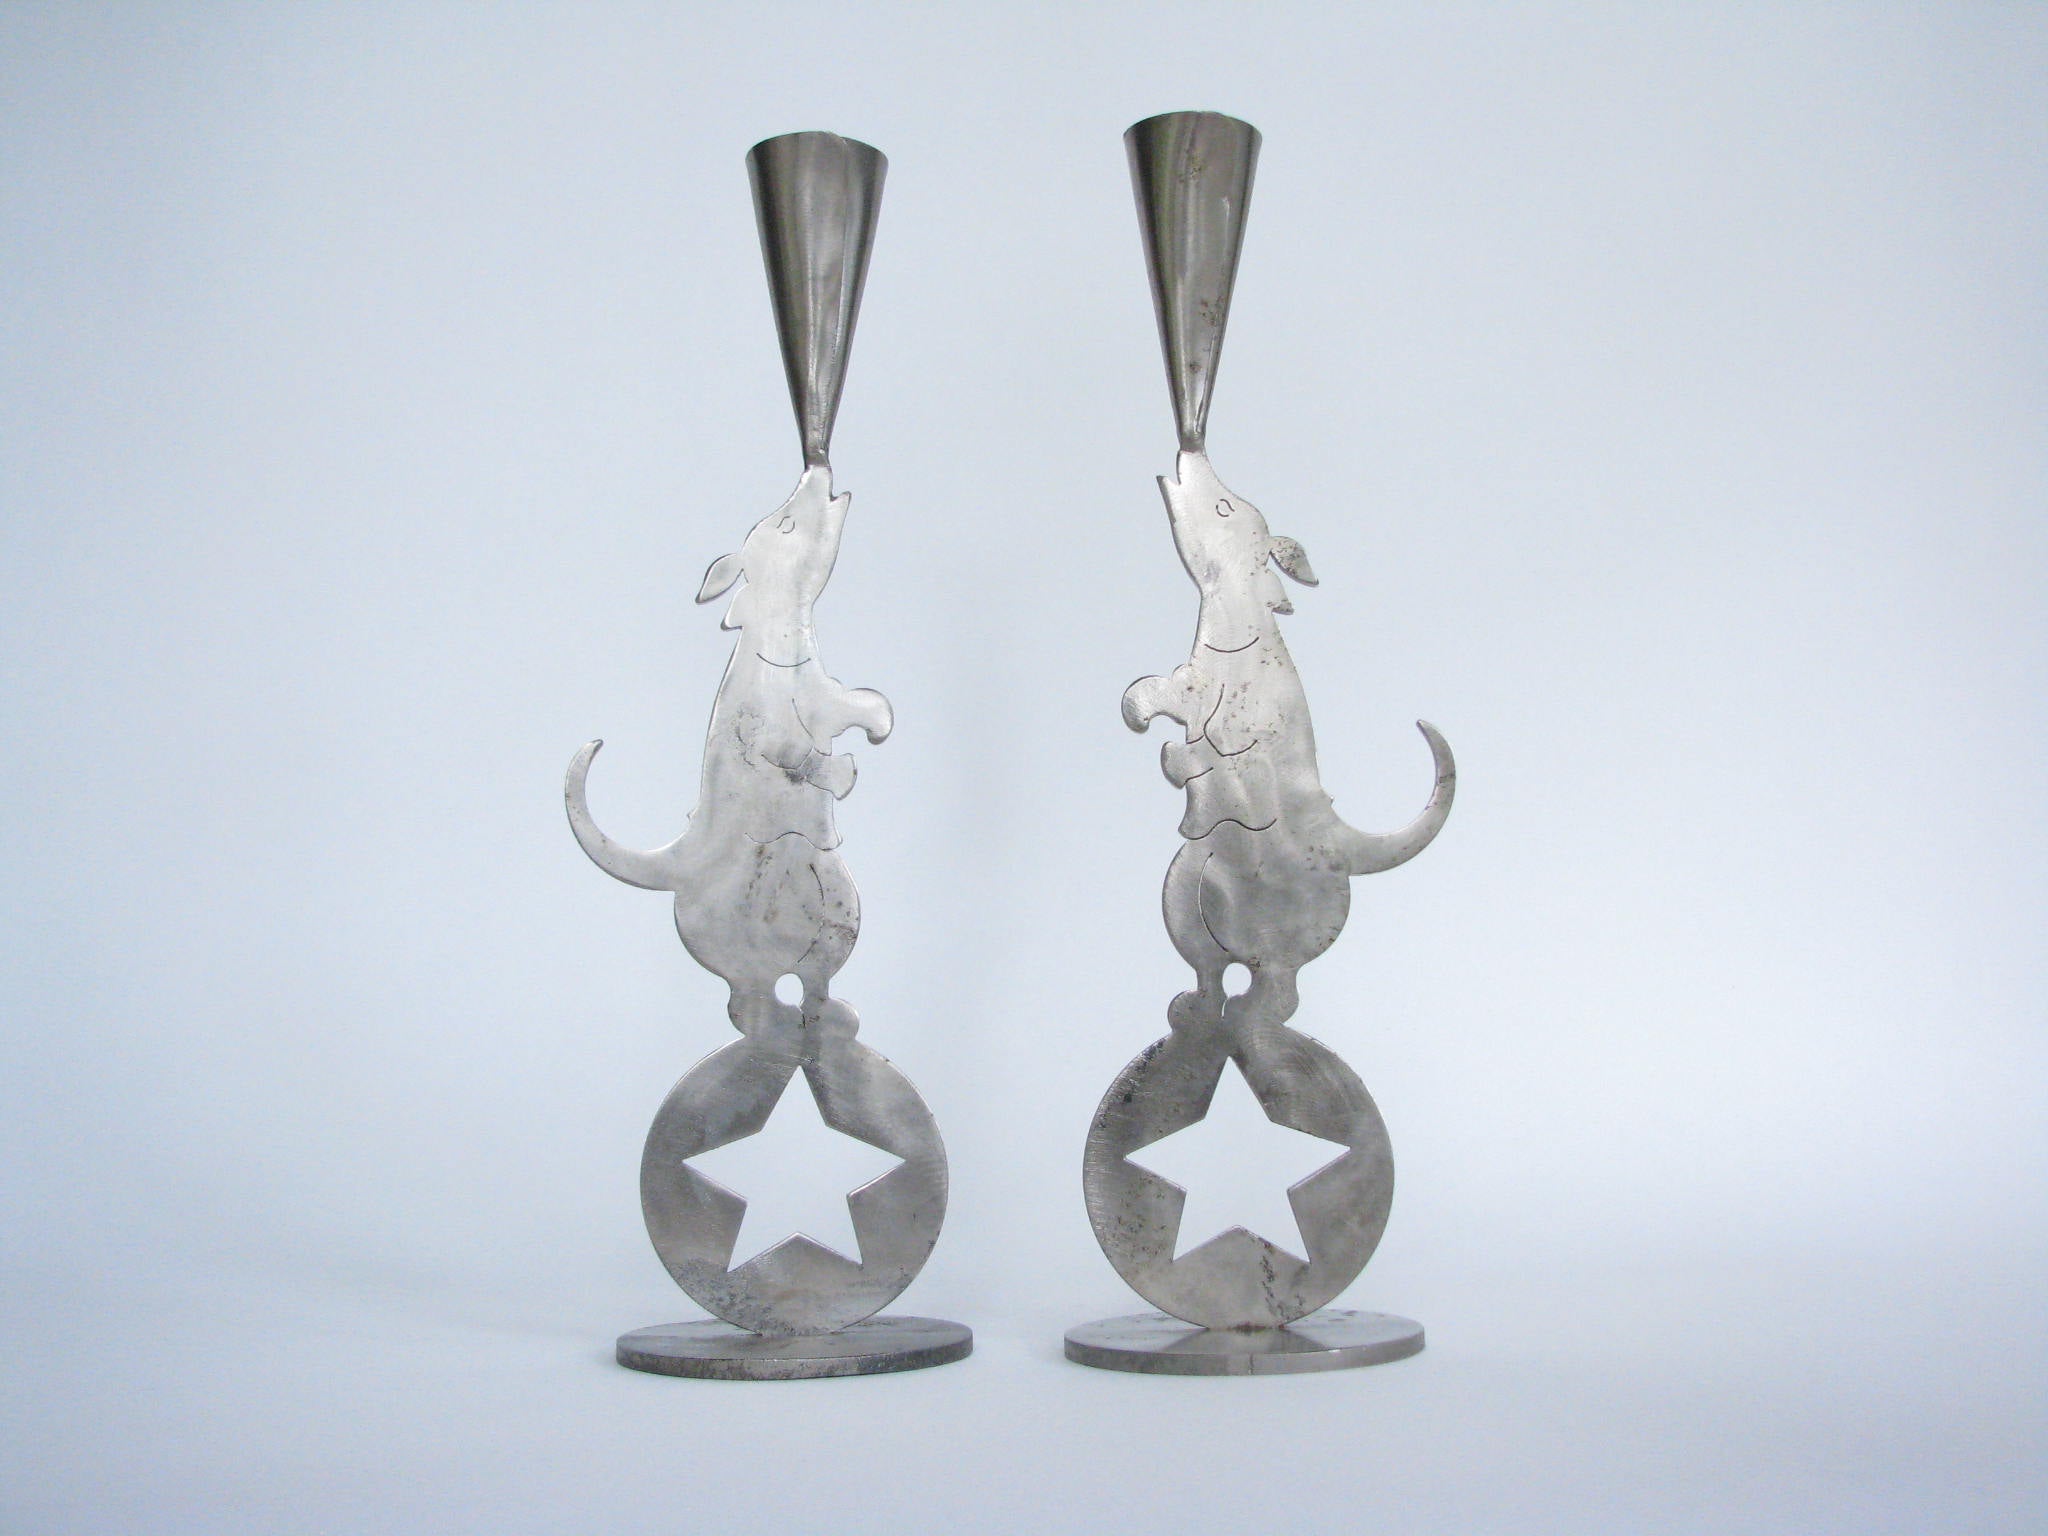 edgebrookhouse - 1990s Brushed Stainless Steel Circus Dog Candleholders by Metal Artist Amy Hess